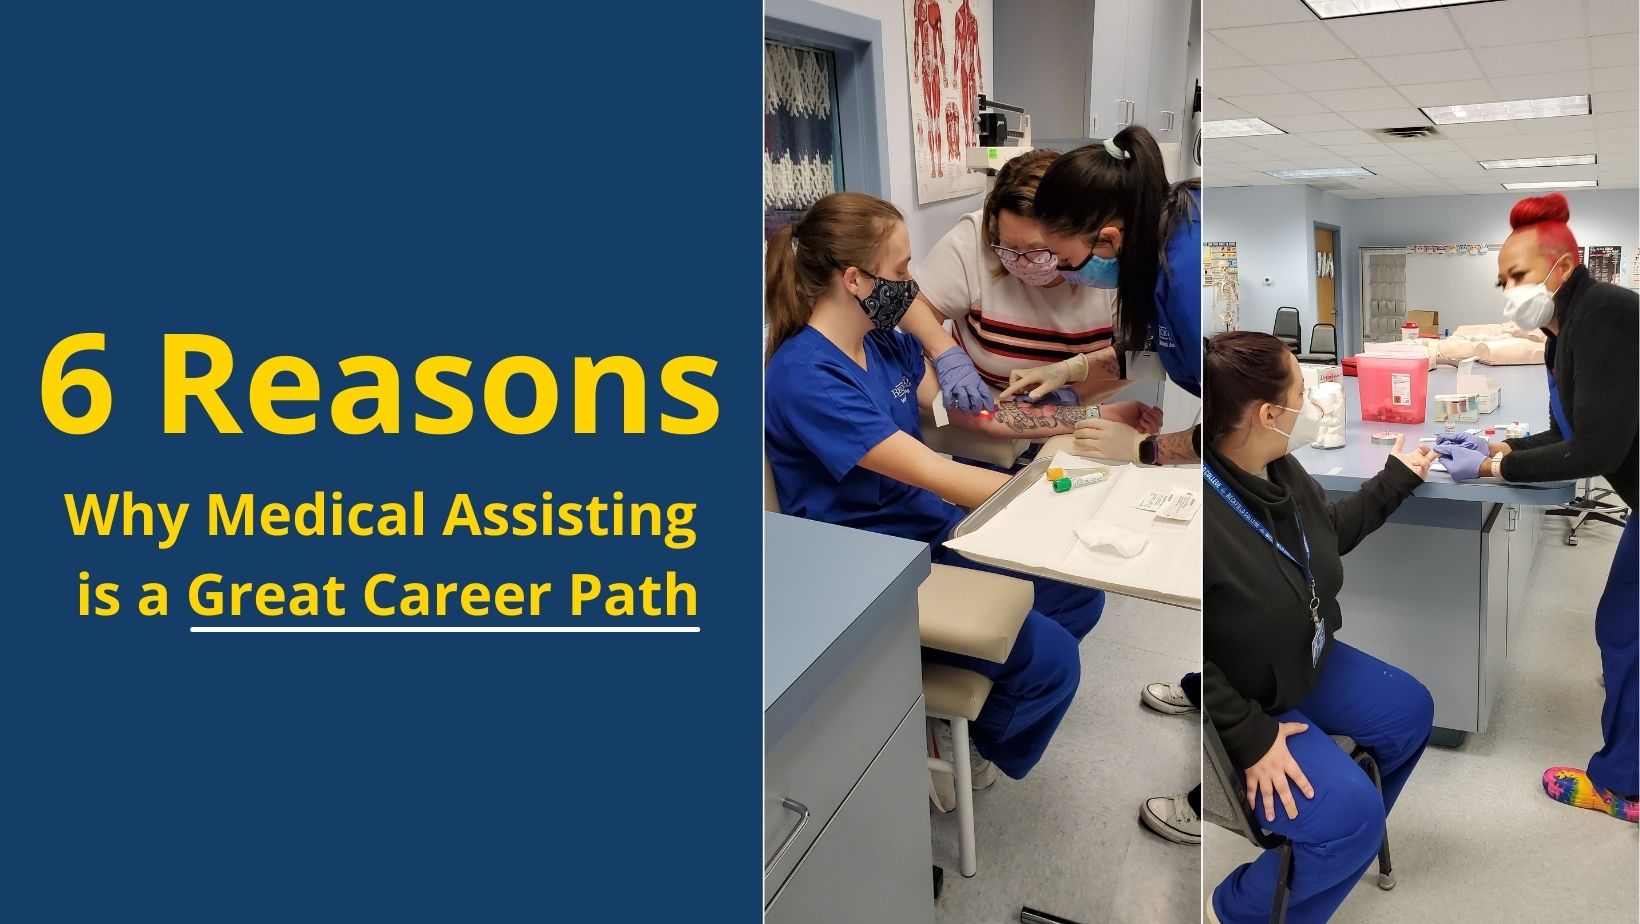 6 Reasons Why Medical Assisting is a Great Career Path